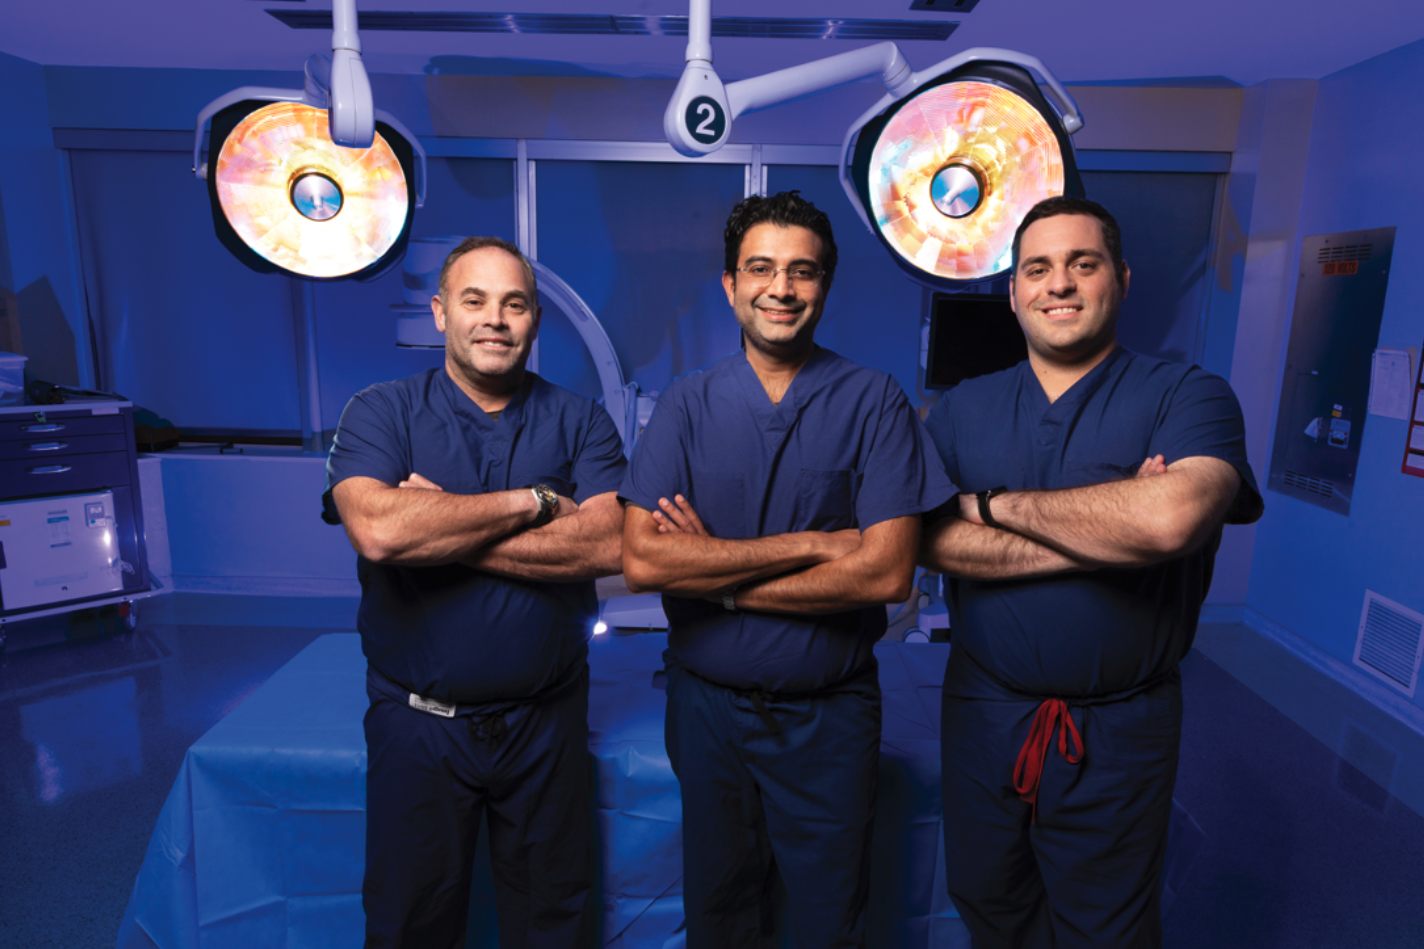 The team of the best-in-class spine surgeons and top-rated neurosurgeons in New Jersey.